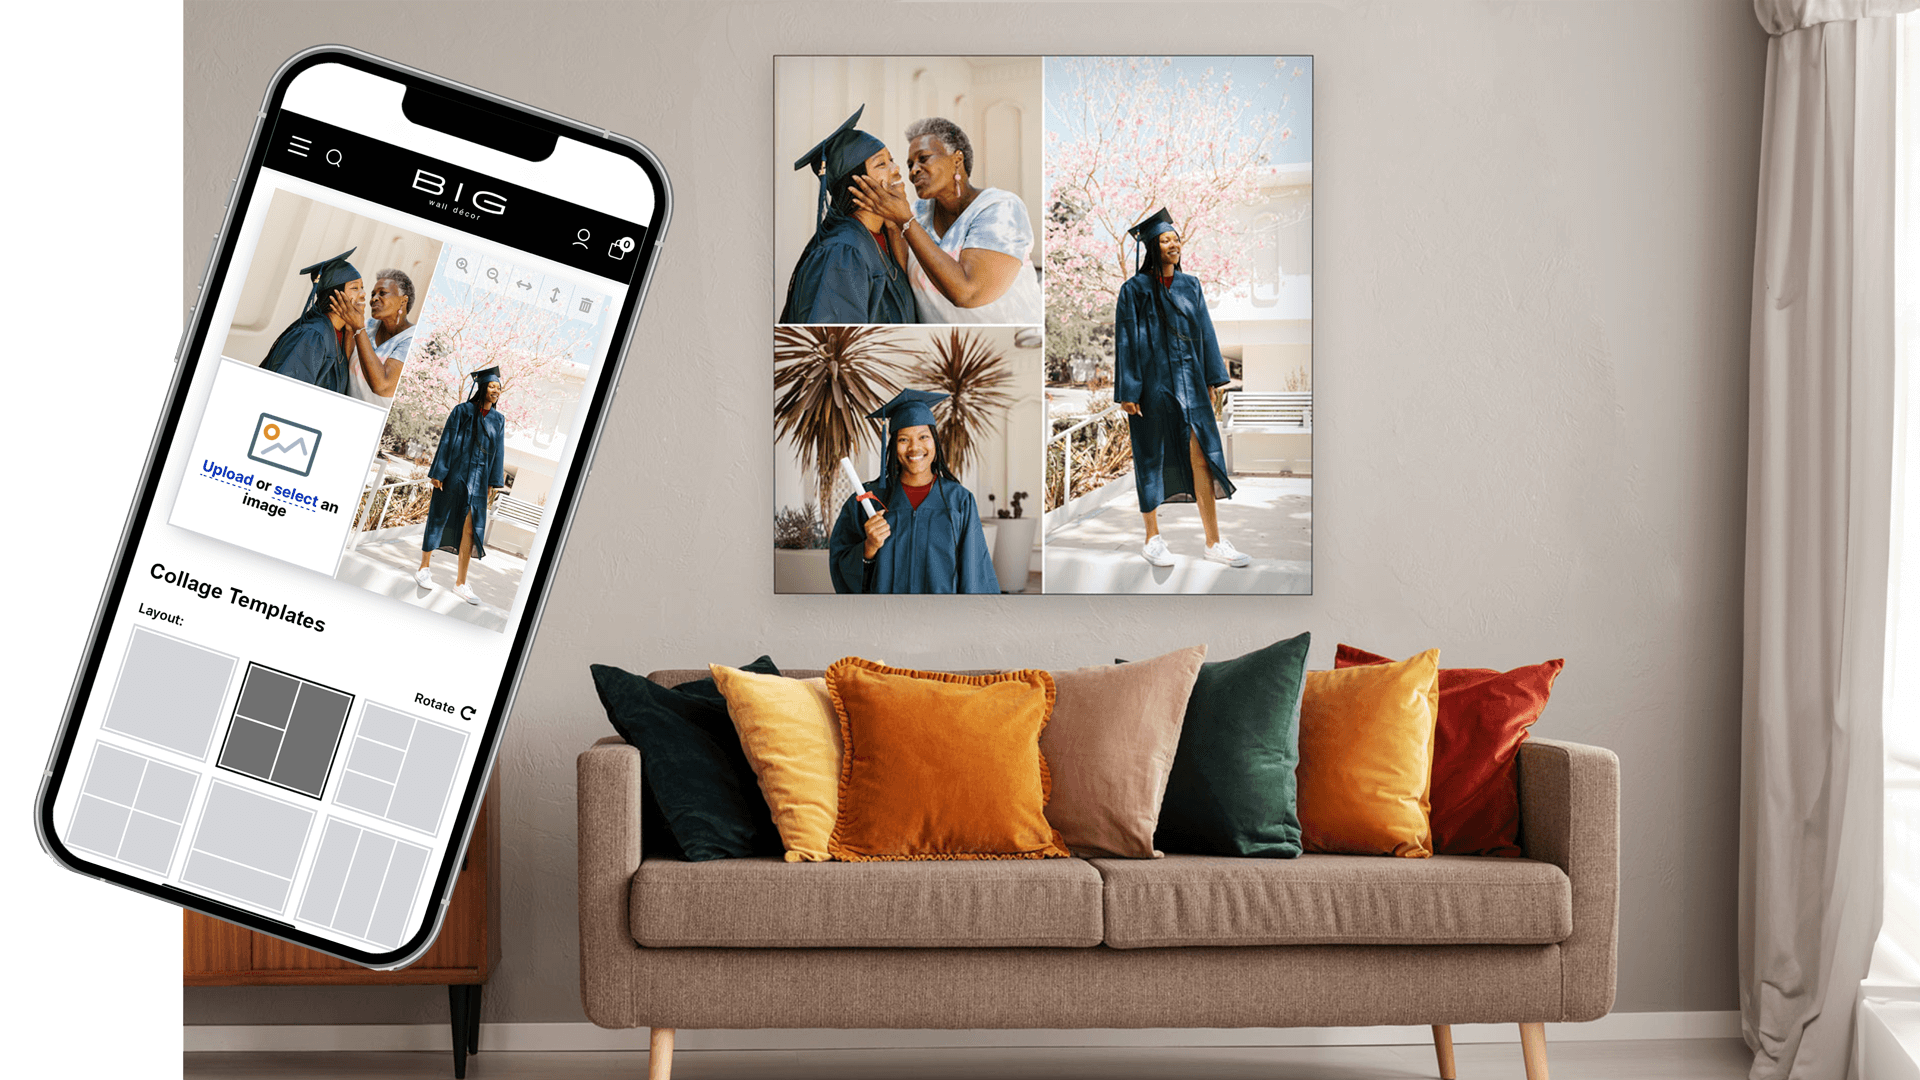 Insight into how custom collage poster hanging above couch in living room was designed, as seen on the phone showing BIG Wall Decor's custom photo collage makers.